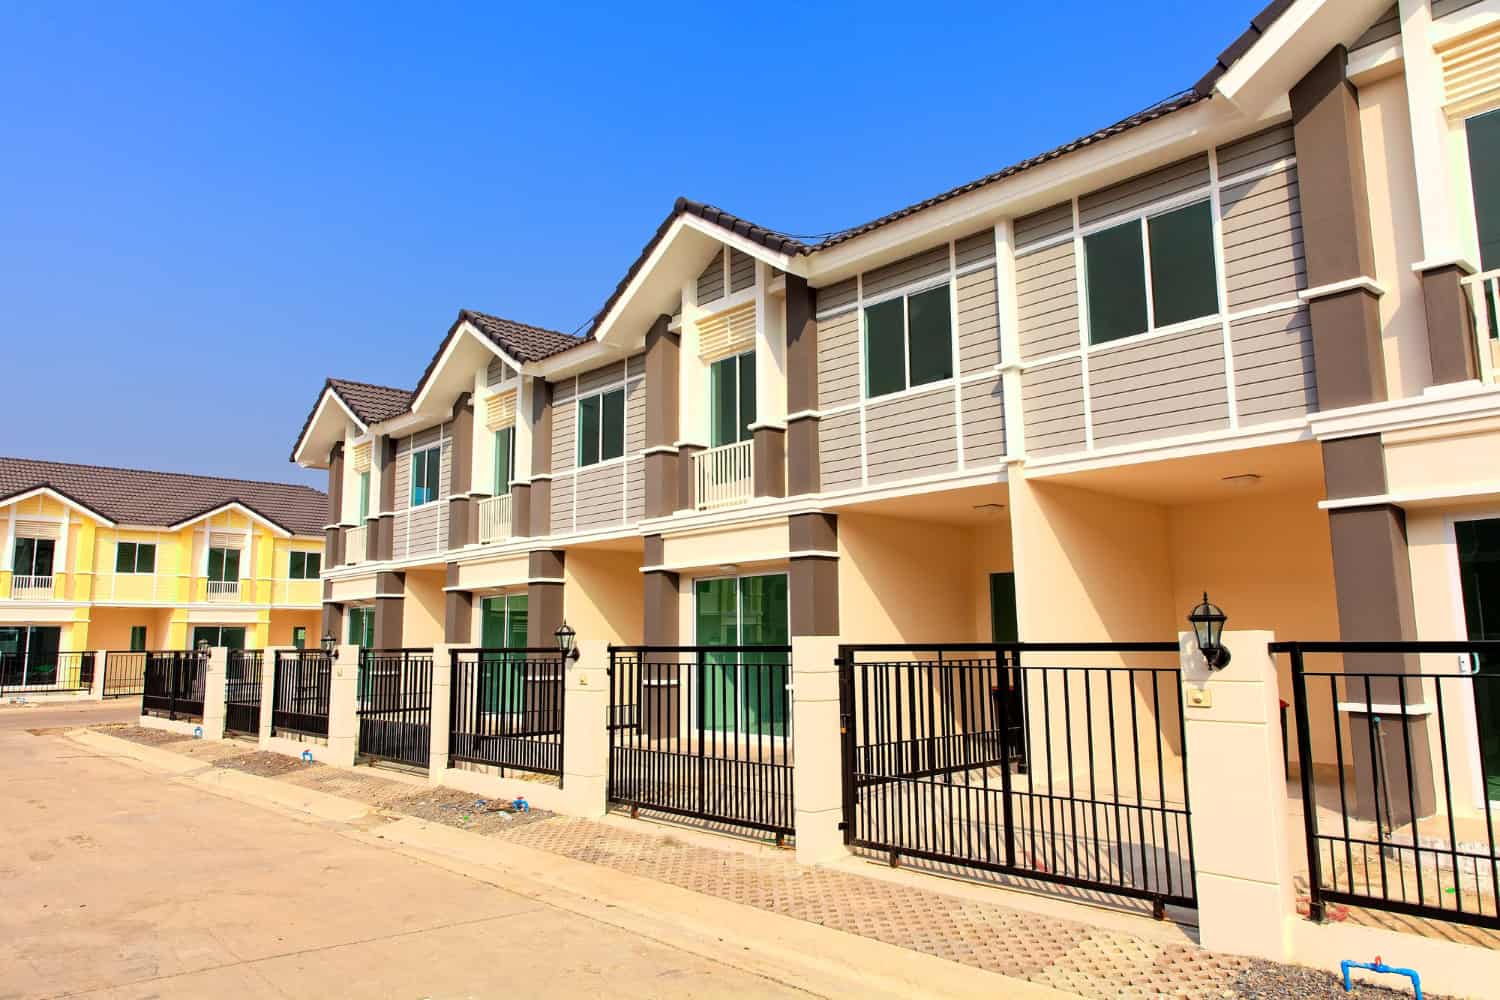 A row of new condos with updated exterior windows, sliding doors, siding, and fences, against a clear blue sky.